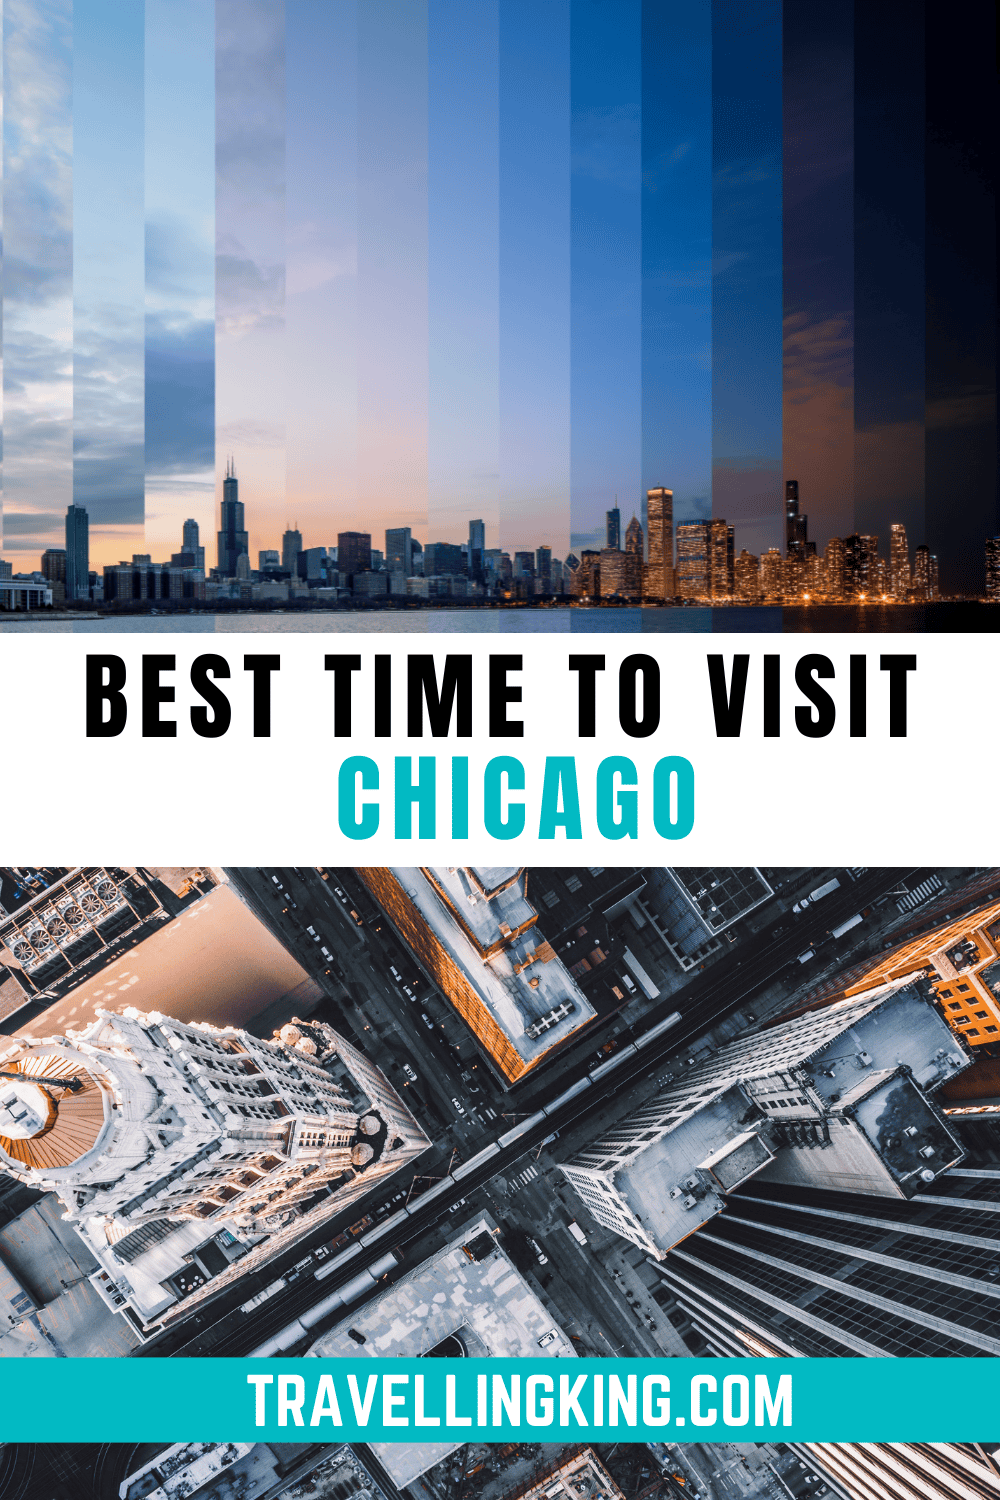 When is the Best Time to Visit Chicago